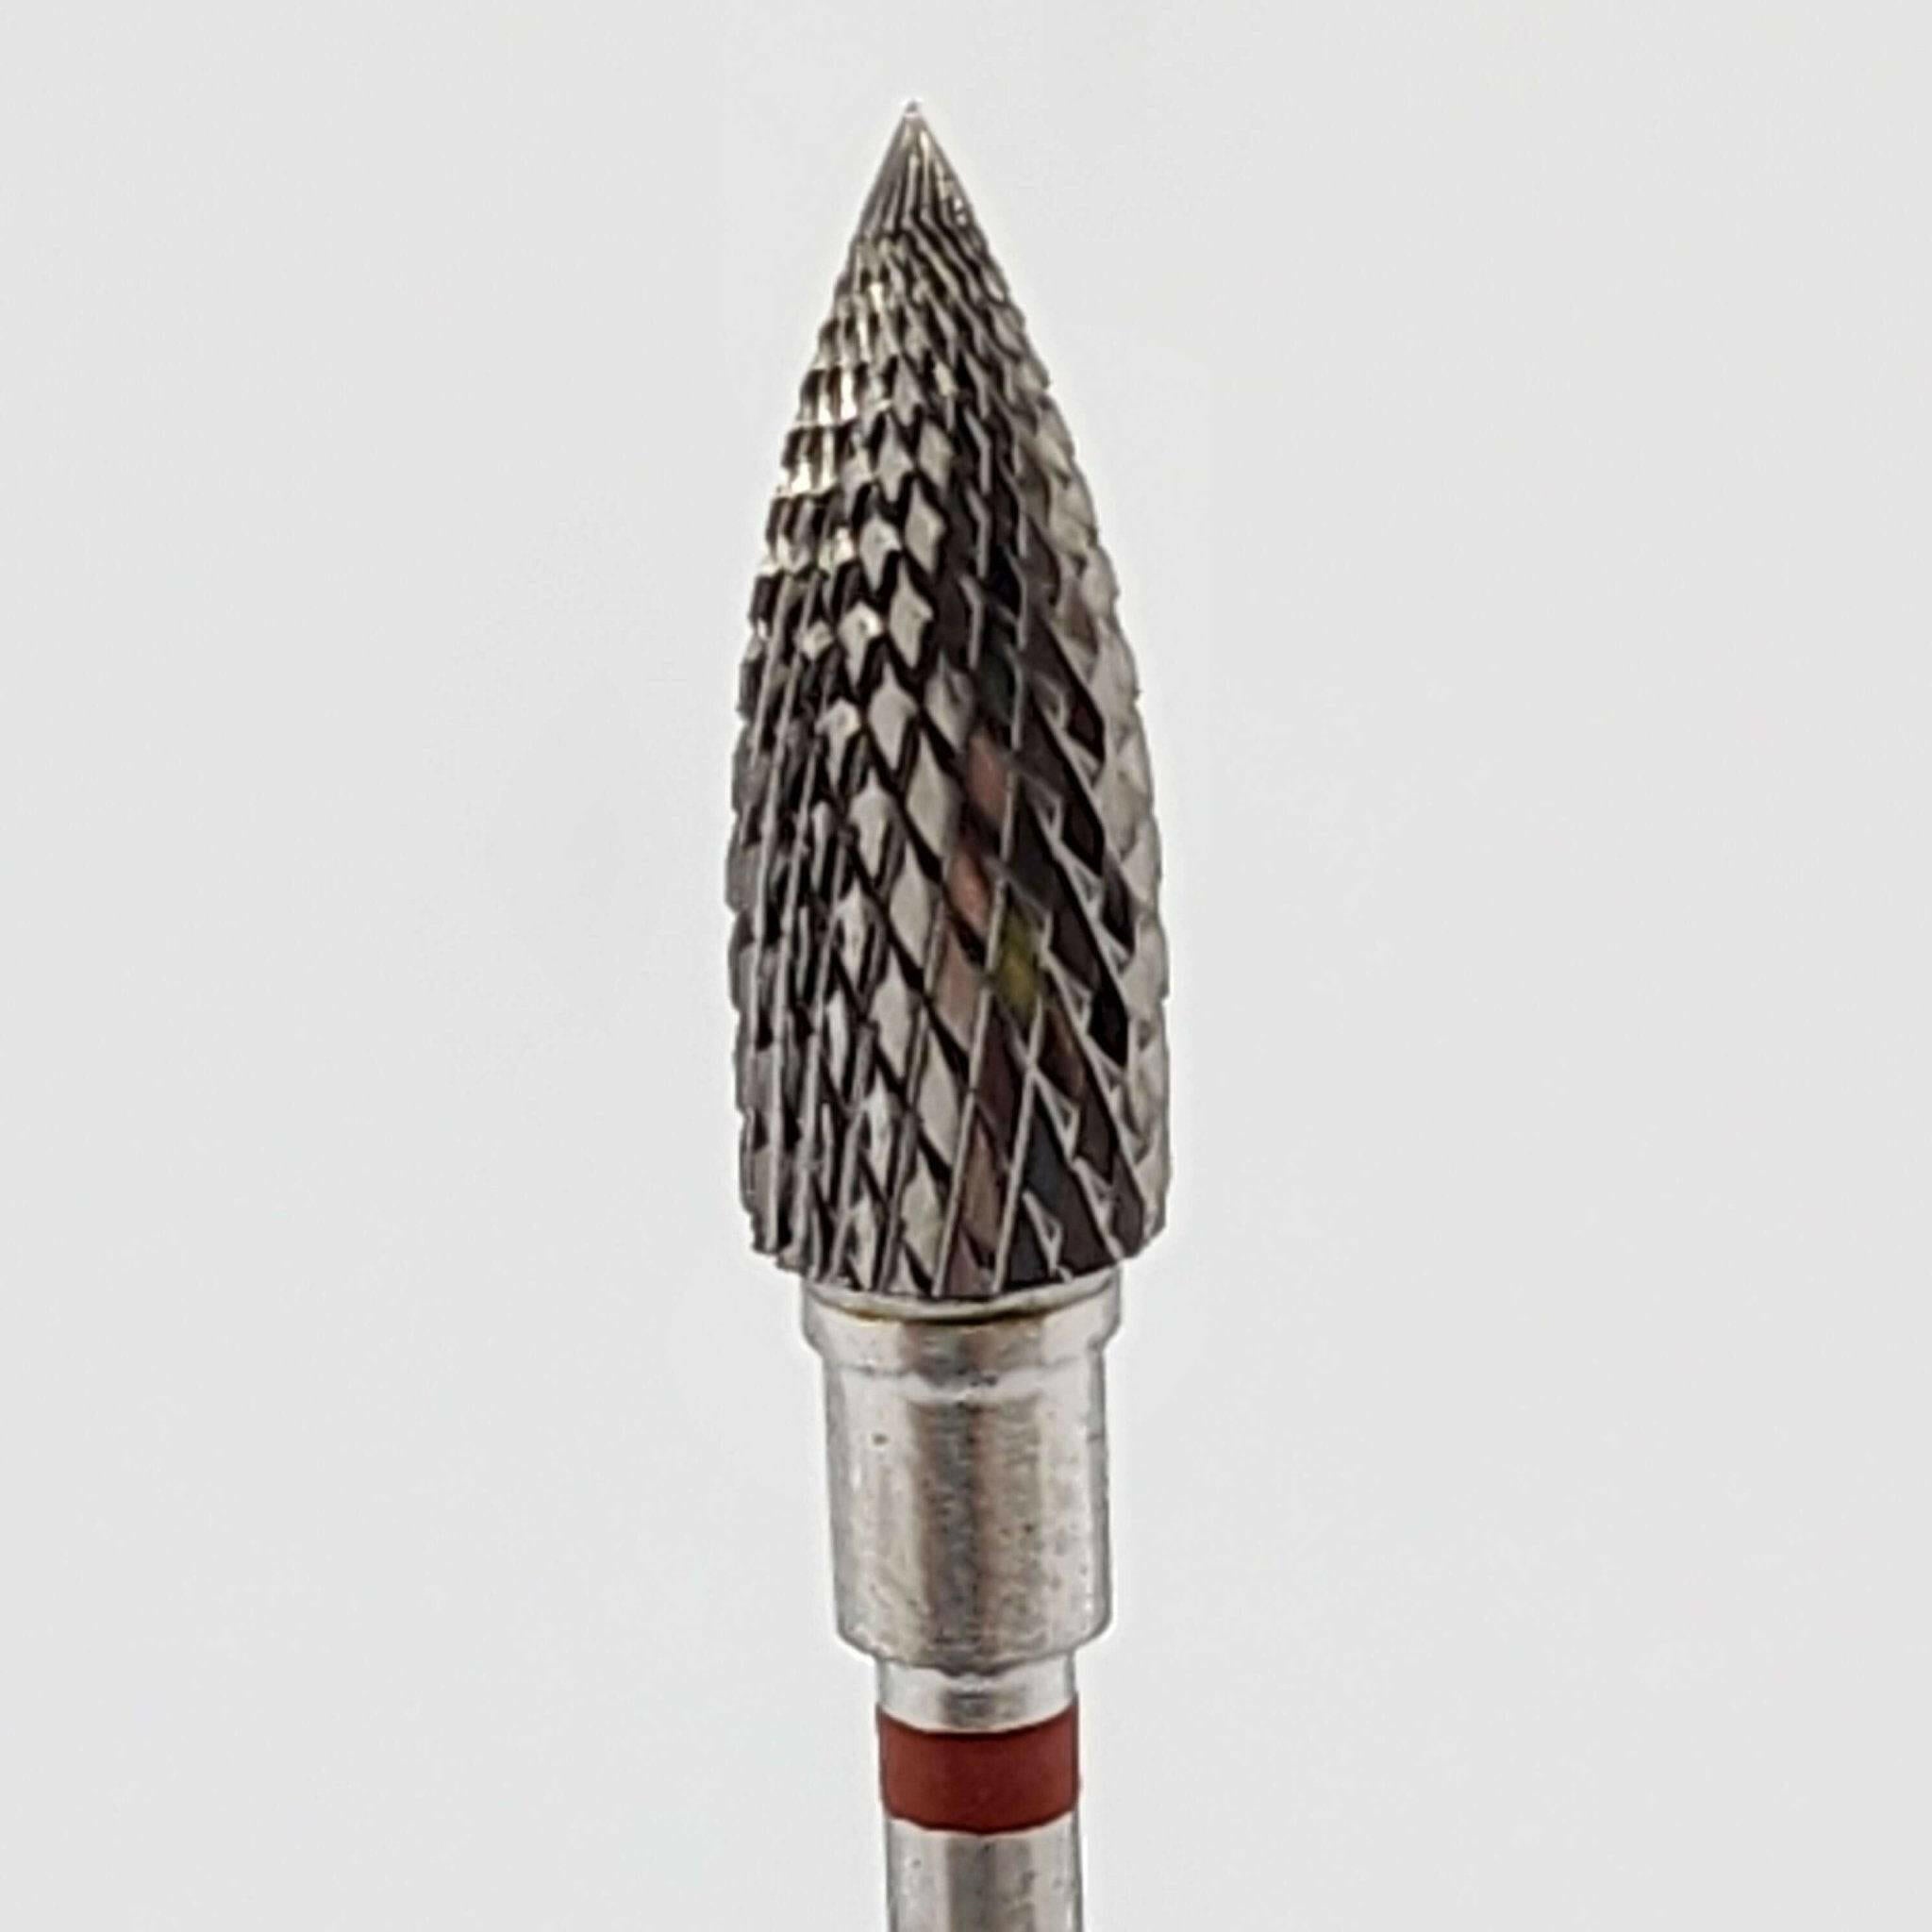 Carbide Nail Dill Bit "Flame" (red + 5mm head/ 13.5mm working) - thePINKchair.ca - efile bit - Staleks